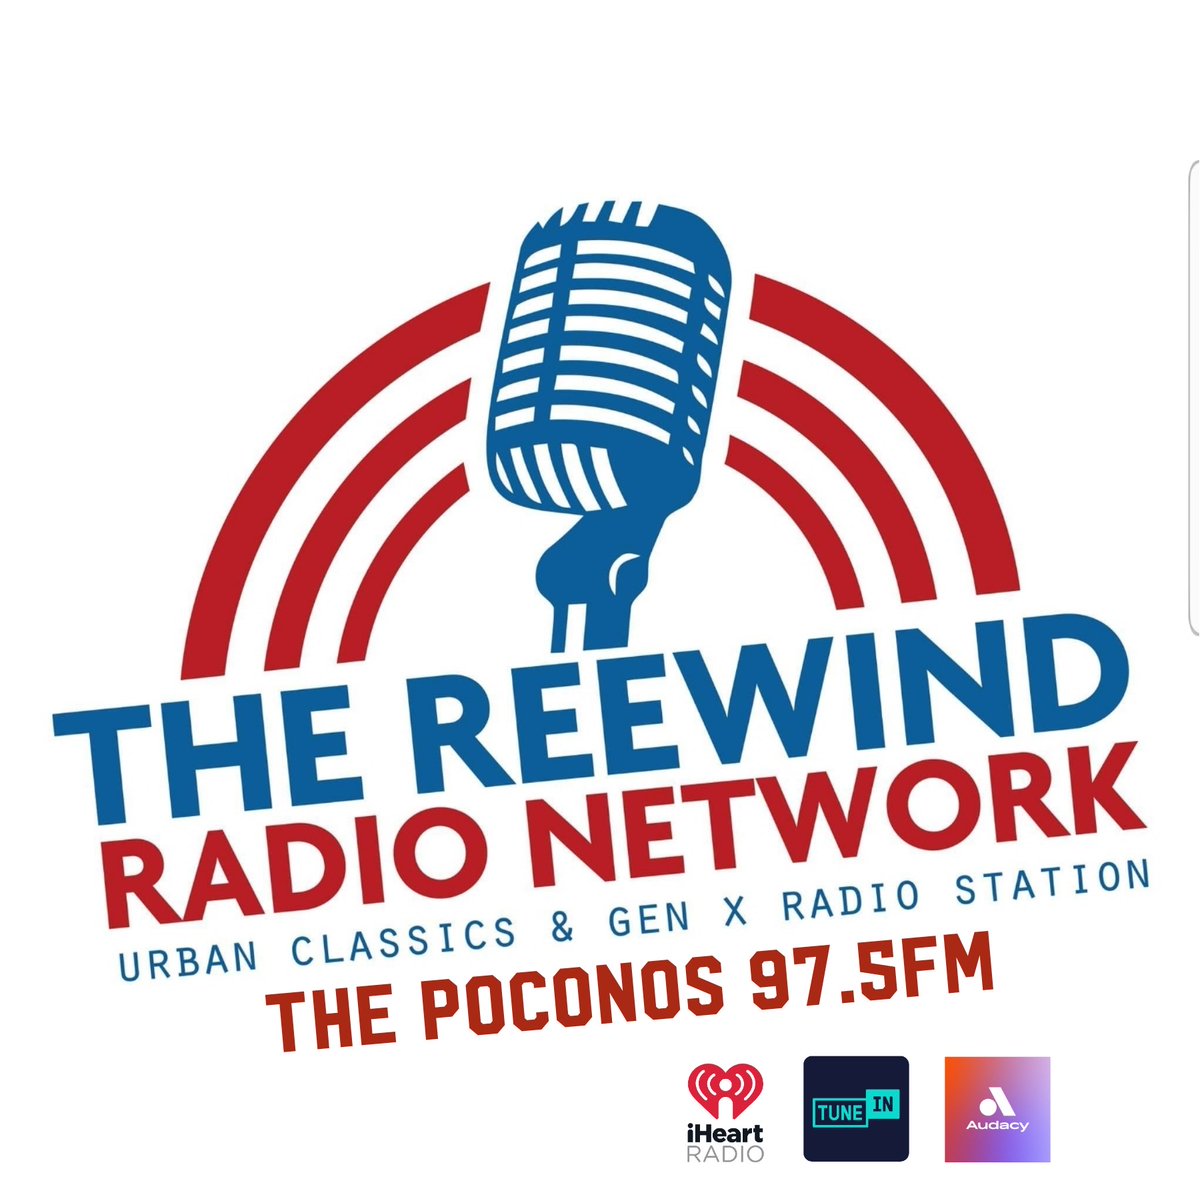 NOW AIRING:
The Reewind High Noon Lunch Mix from 12pm – 1pm EST

LISTEN LIVE to The @reewindradionetwork on @iheartradio tinyurl.com/ye2anw48

#reewind #reewindnetwork #reewindradionetwork
#classicdisco #urbanmusic #hiphopoldschool #afrobeat  #afroswing #rhythmandblues